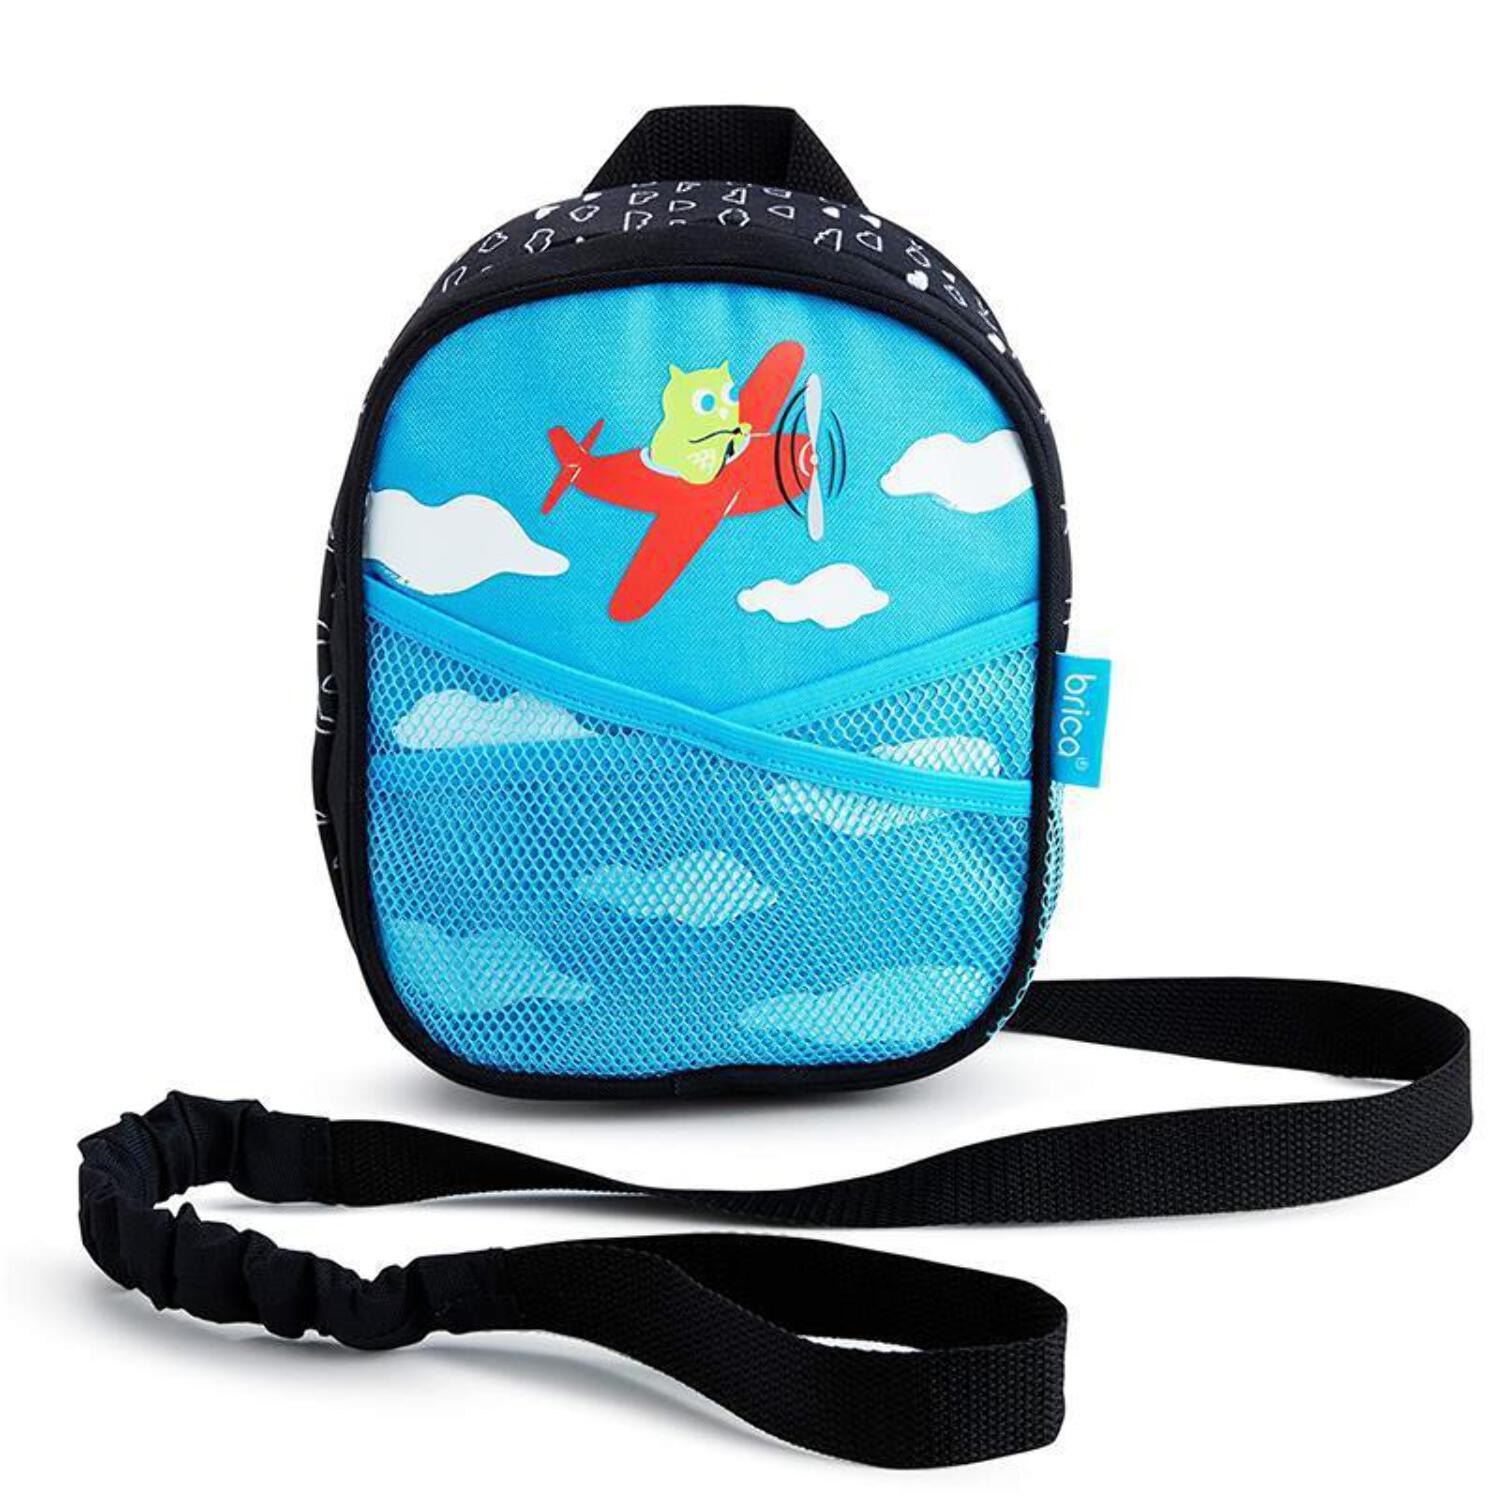 Munchkin® Brica® By-My-Side™ Toddler Safety Harness Backpack with Leash, Owl, Blue, Unisex - image 2 of 7